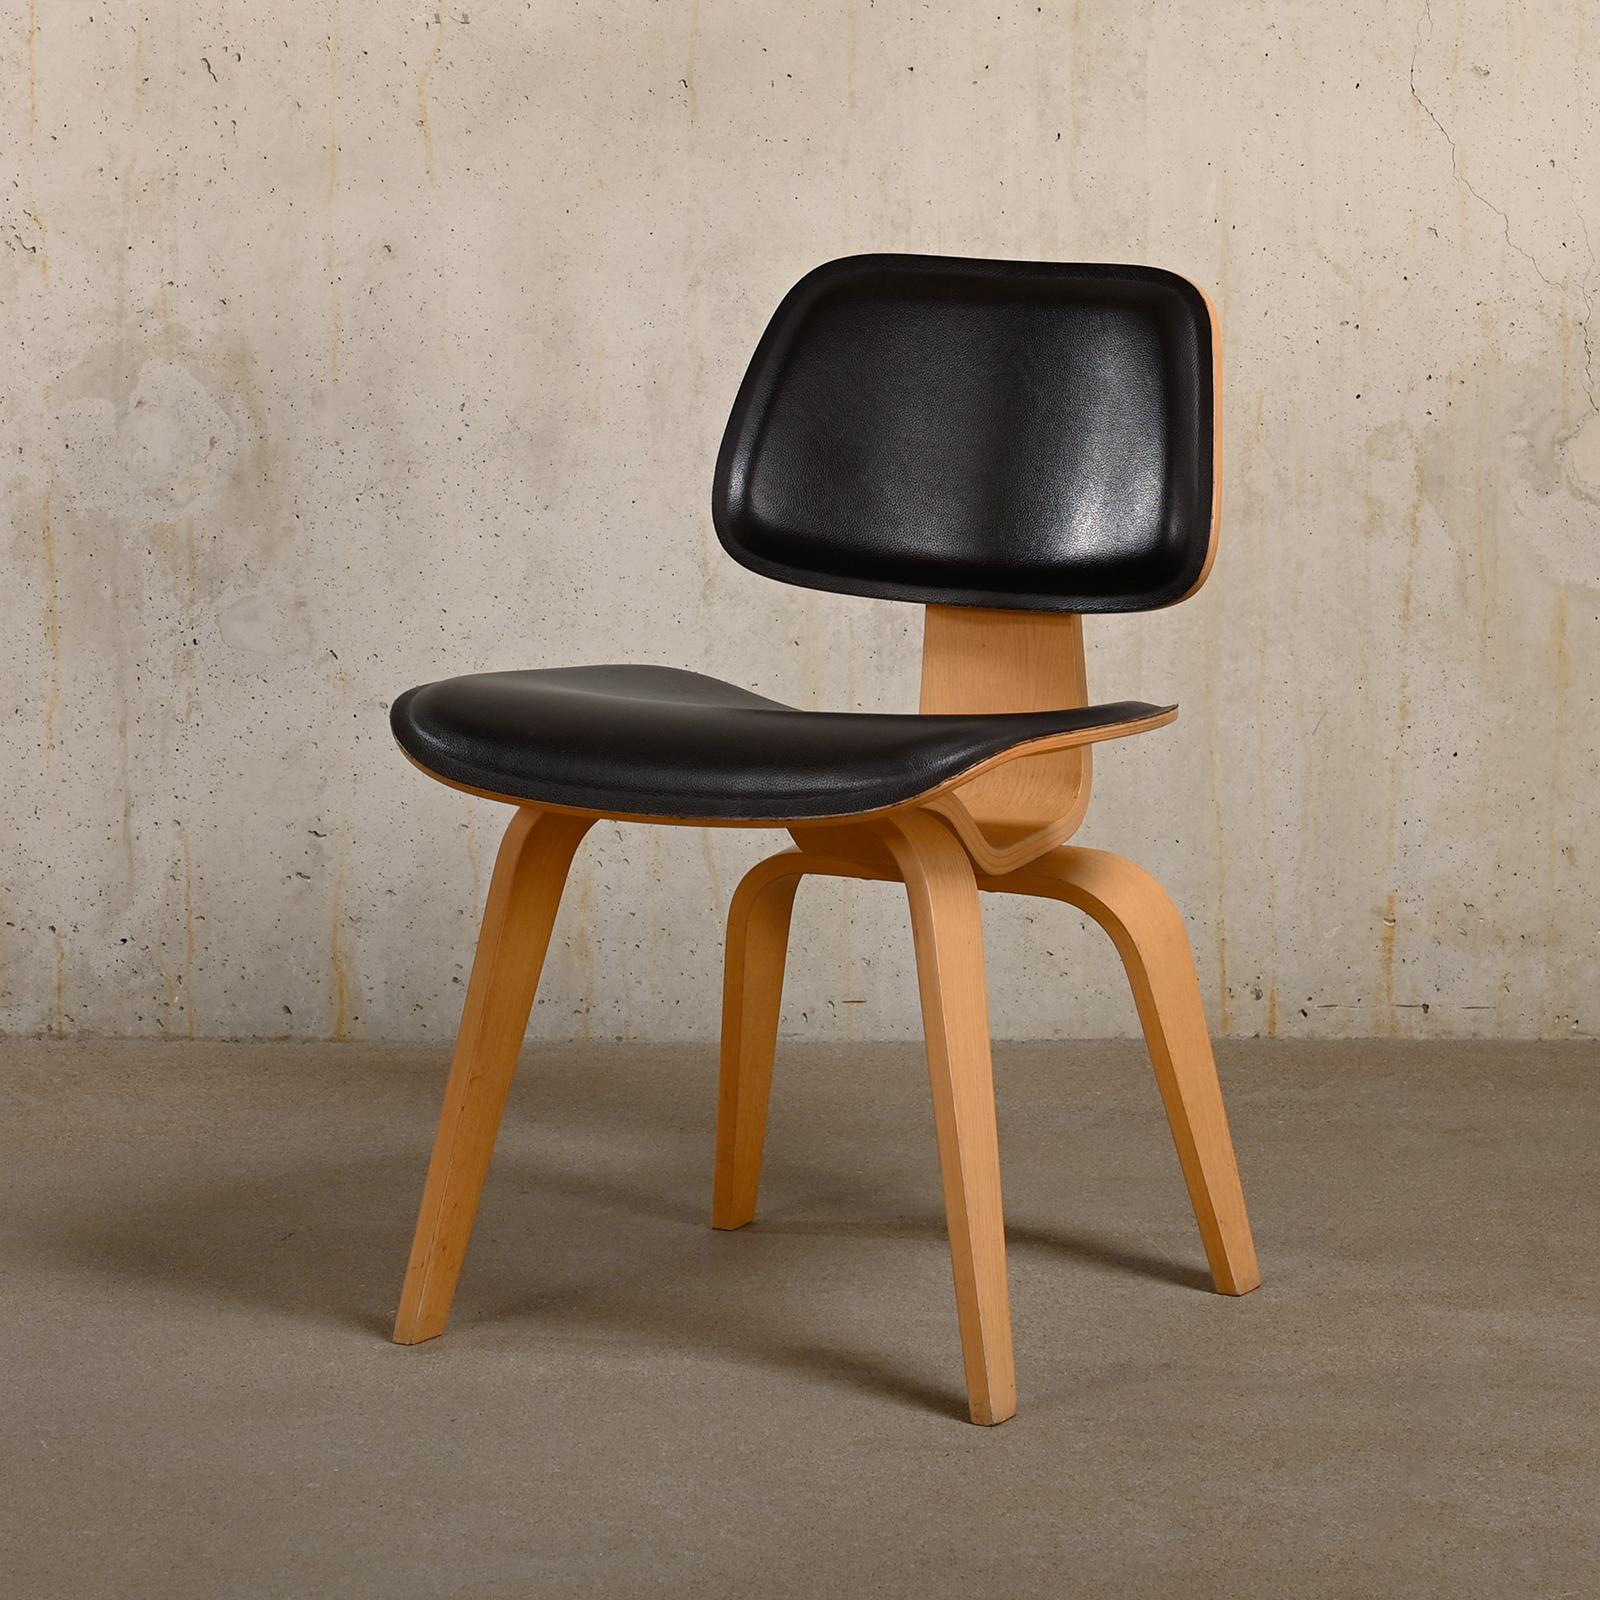 Iconic DCW dining chair designed by Charles & Ray Eames and manufacture by Vitra, Germany. Solid Ash wood frames finished with matte lacquer. Seat and back panel is upholstered with a very dark brown Leather and supported with foam cushions. This